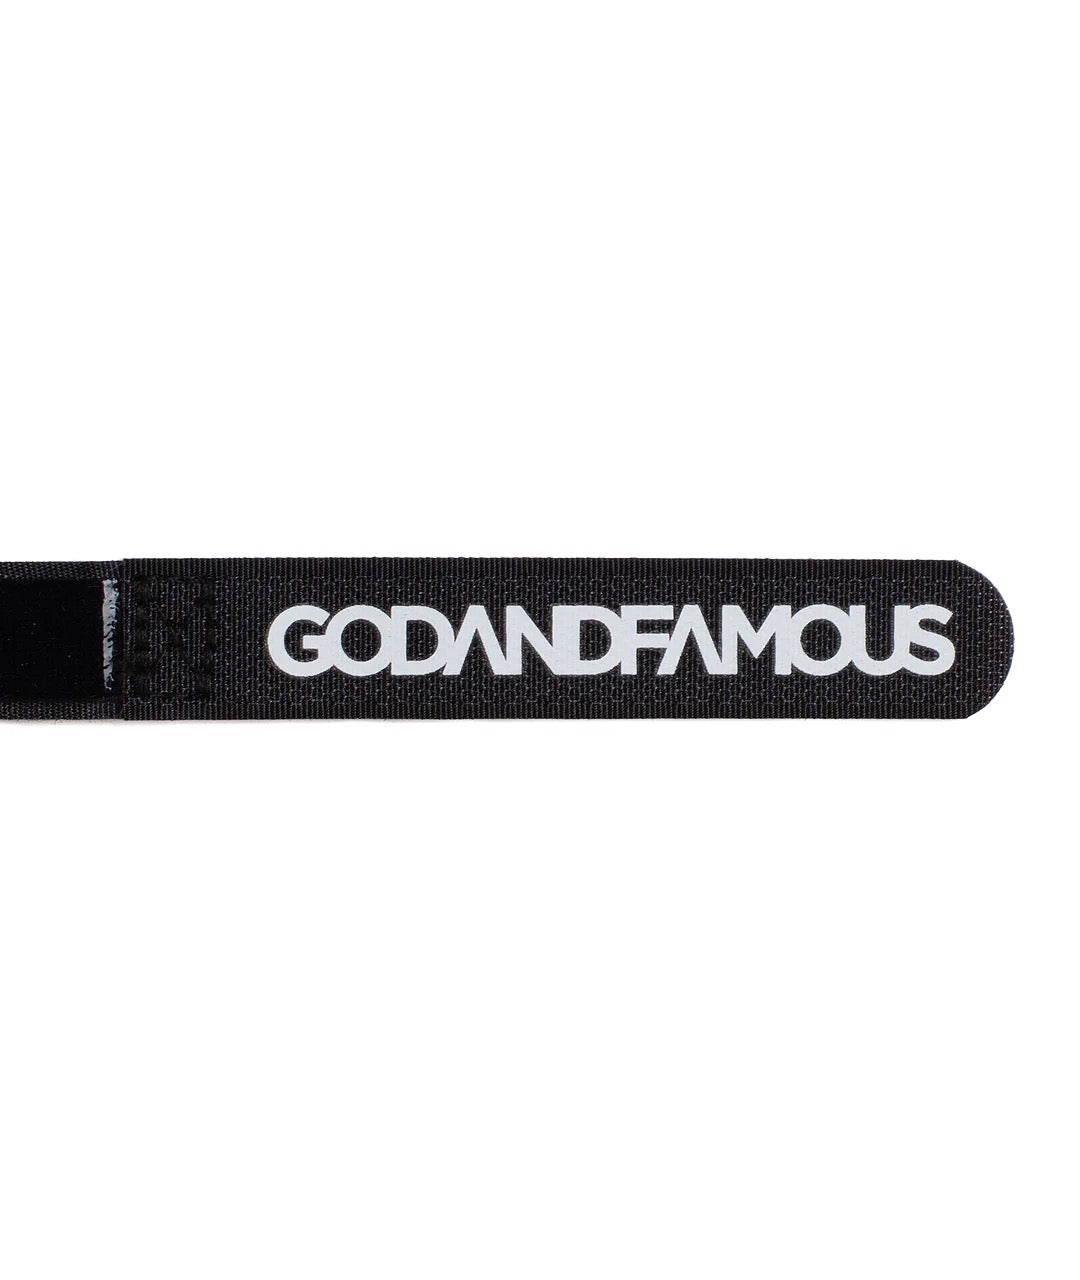 God & Famous Team All-Purpose Straps (2-Pack)